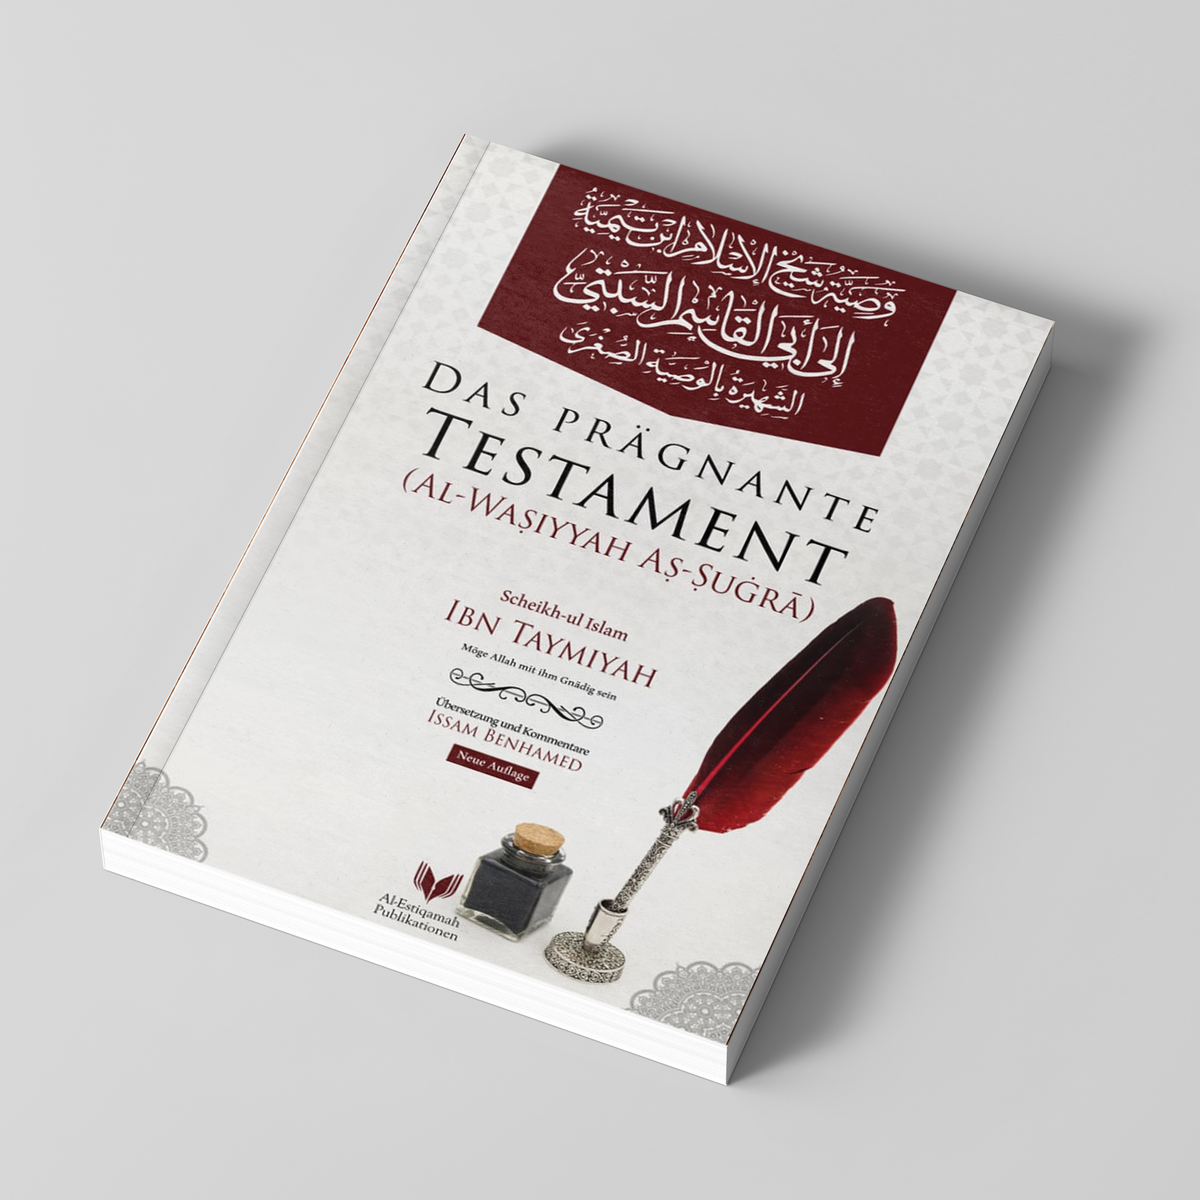 The Concise Testament (Al-Wasiyyah as-Sugra)